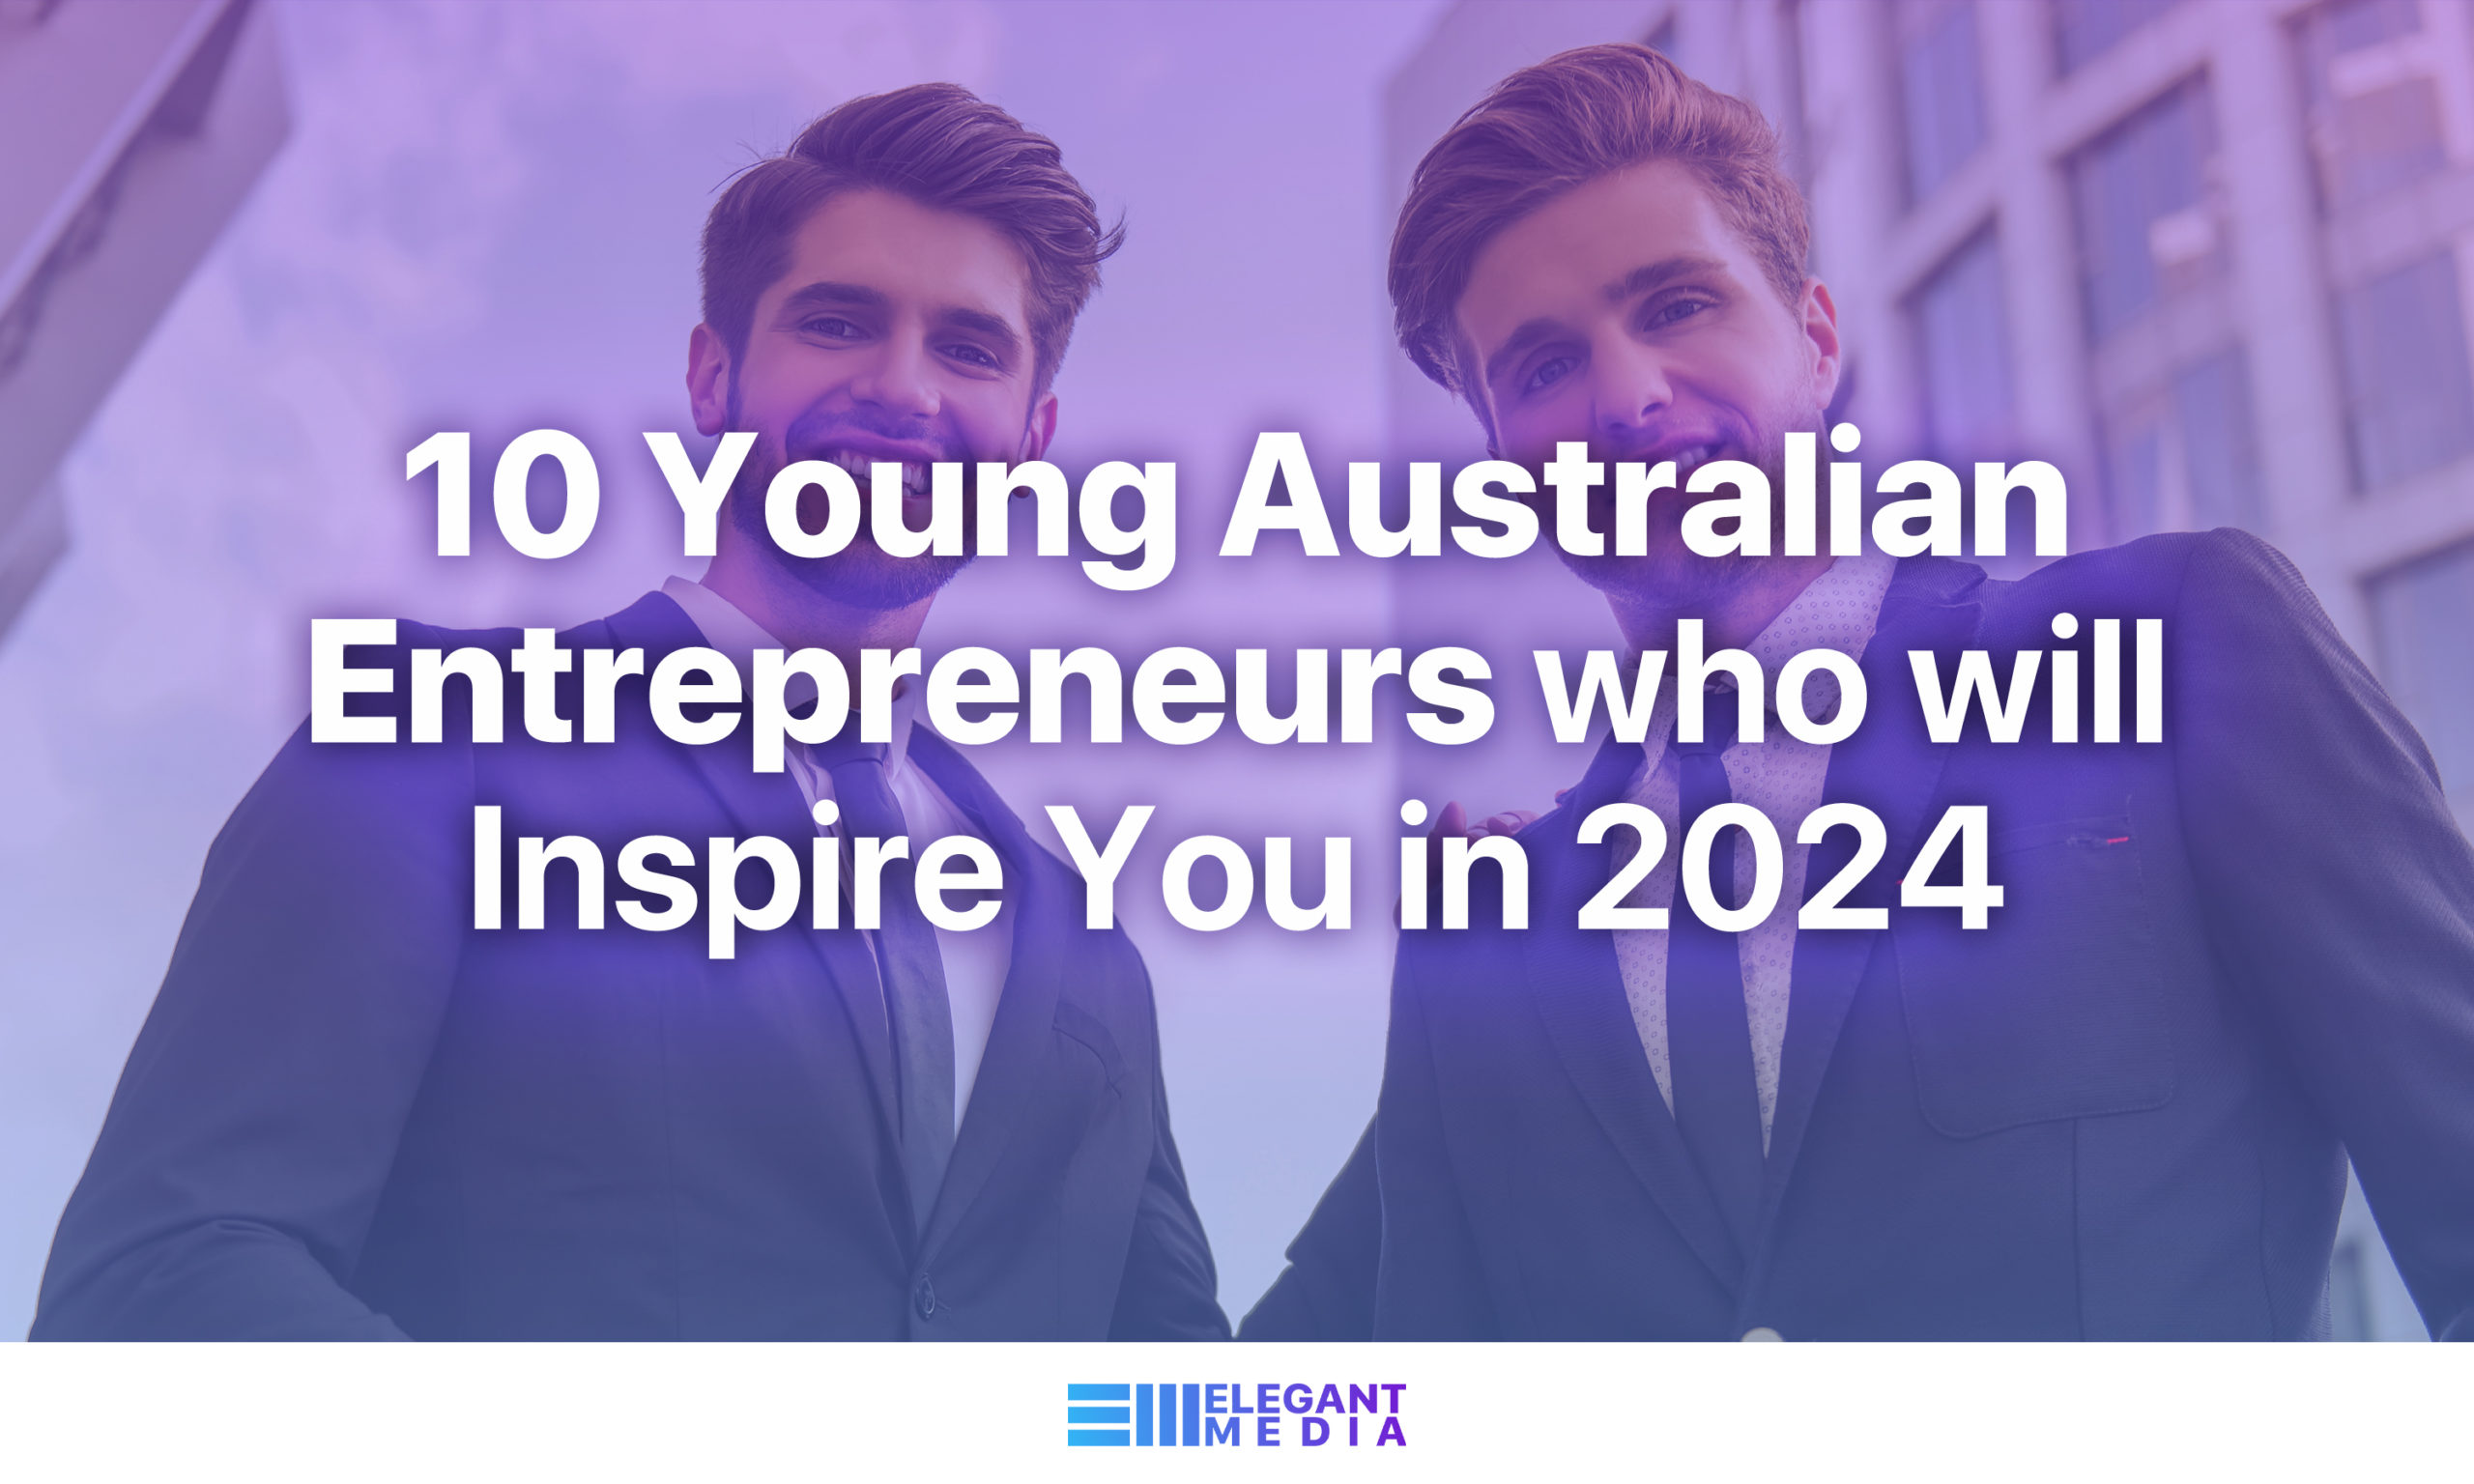 10 Young Australian Entrepreneurs who will Inspire You in 2024